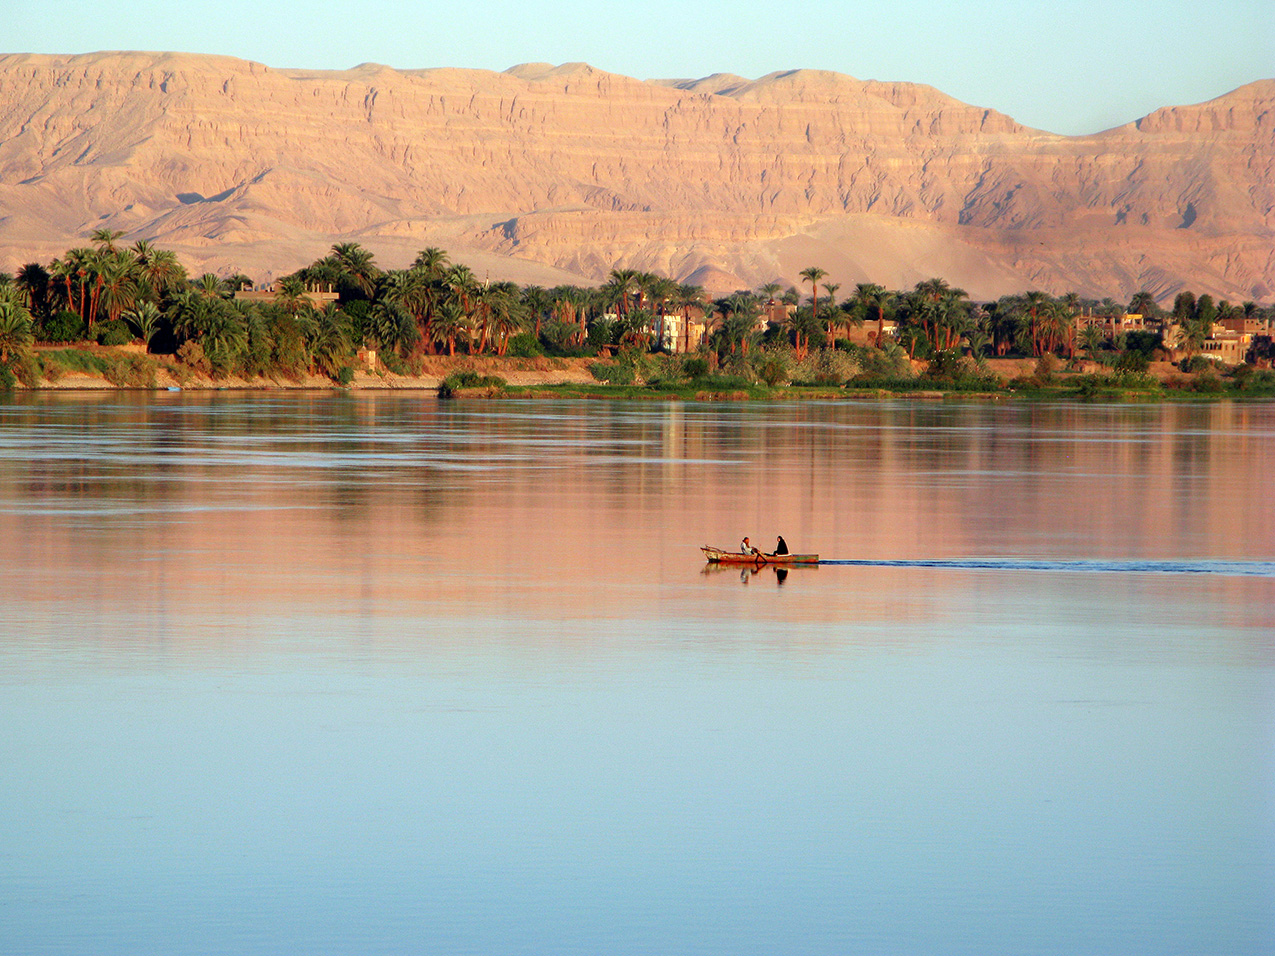 two people travel in a red boat on the Nile River in Egypt. the water is blue but reflects the orange cliffs in the distance, and palm trees and buildings cover the opposite shore.